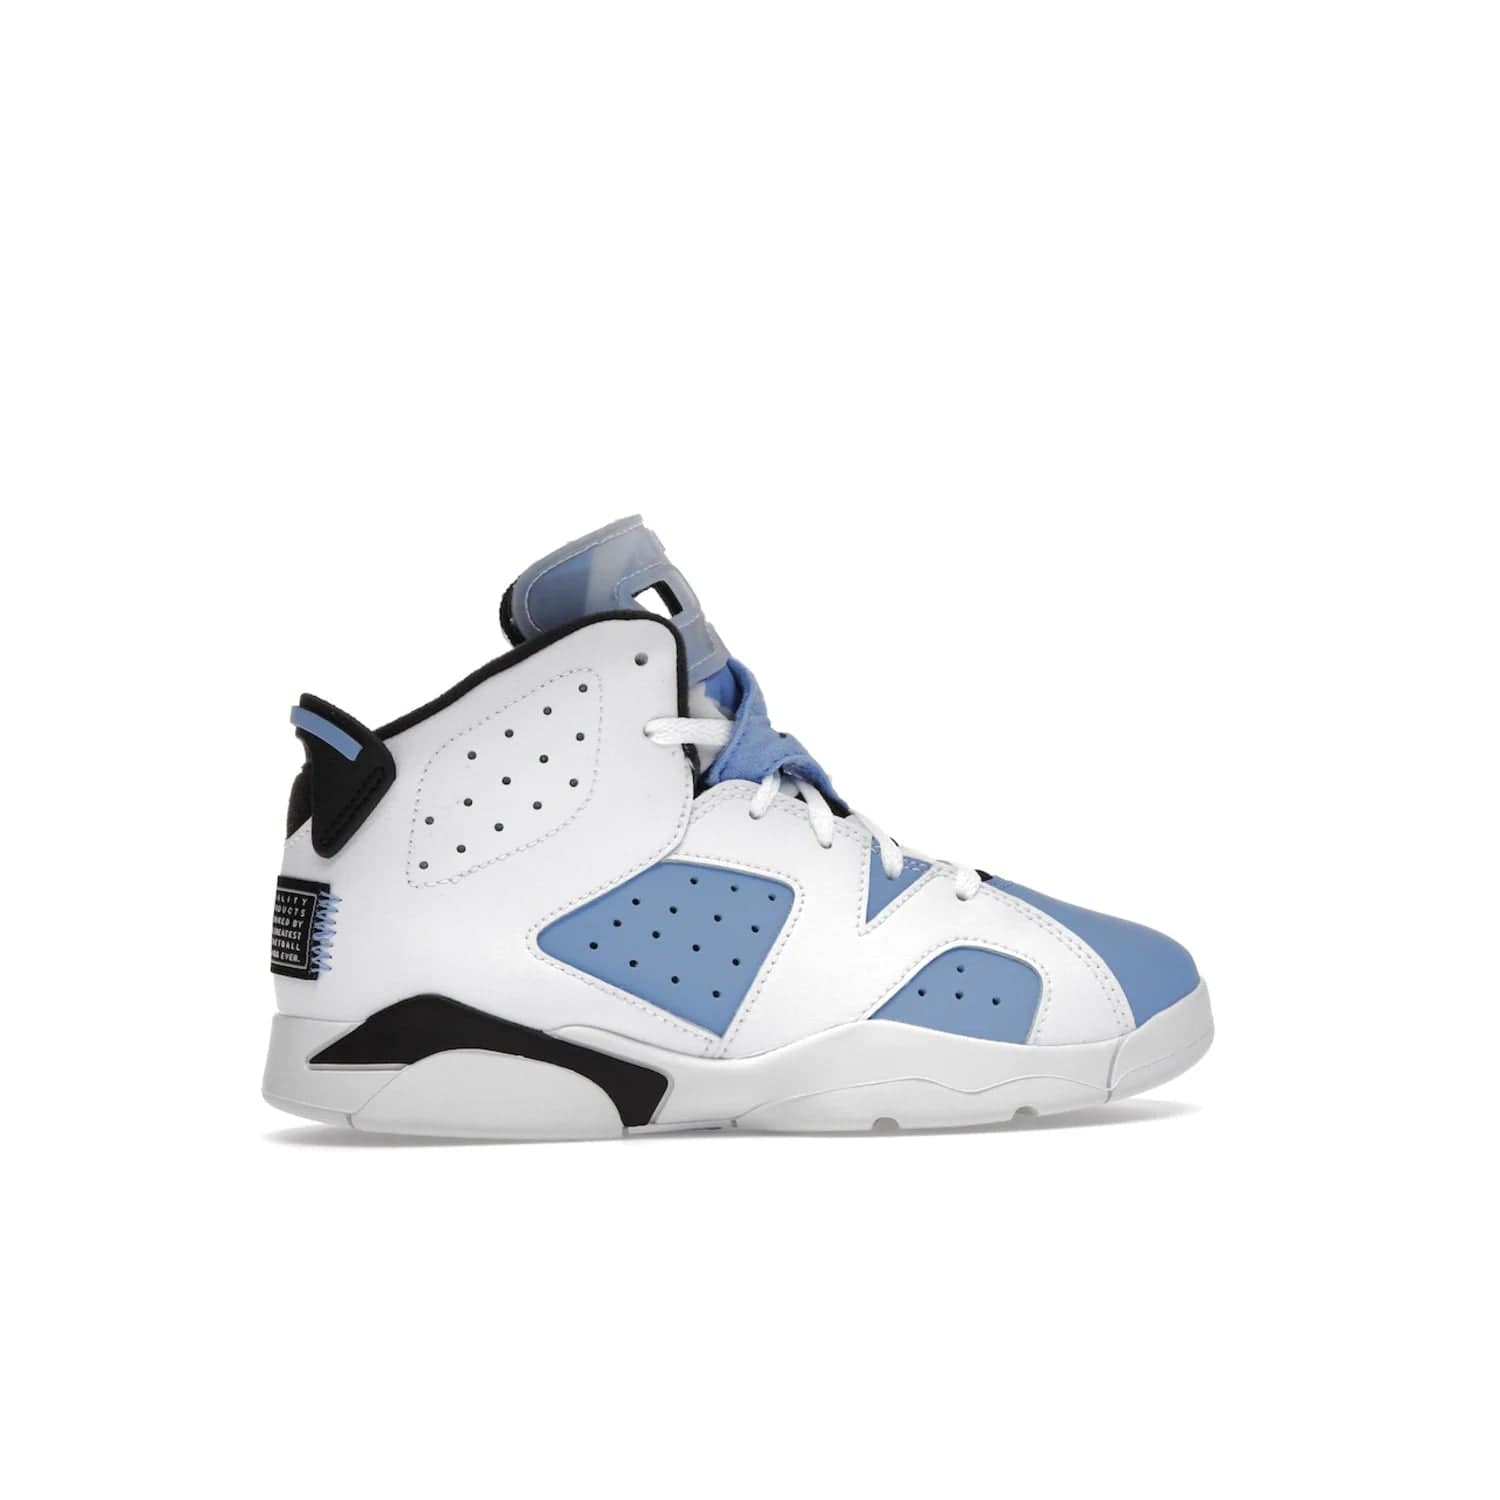 Jordan 6 Retro UNC White (PS) - Image 36 - Only at www.BallersClubKickz.com - The Air Jordan 6 Retro UNC White PS celebrates Michael Jordan's alma mater, the University of North Carolina. It features a classic color-blocking of the iconic Jordan 6 Carmine and a stitched Jordan Team patch. This must-have sneaker released on April 27th, 2022. Referencing the university colors, get this shoe for a stylish and timeless style with university pride.